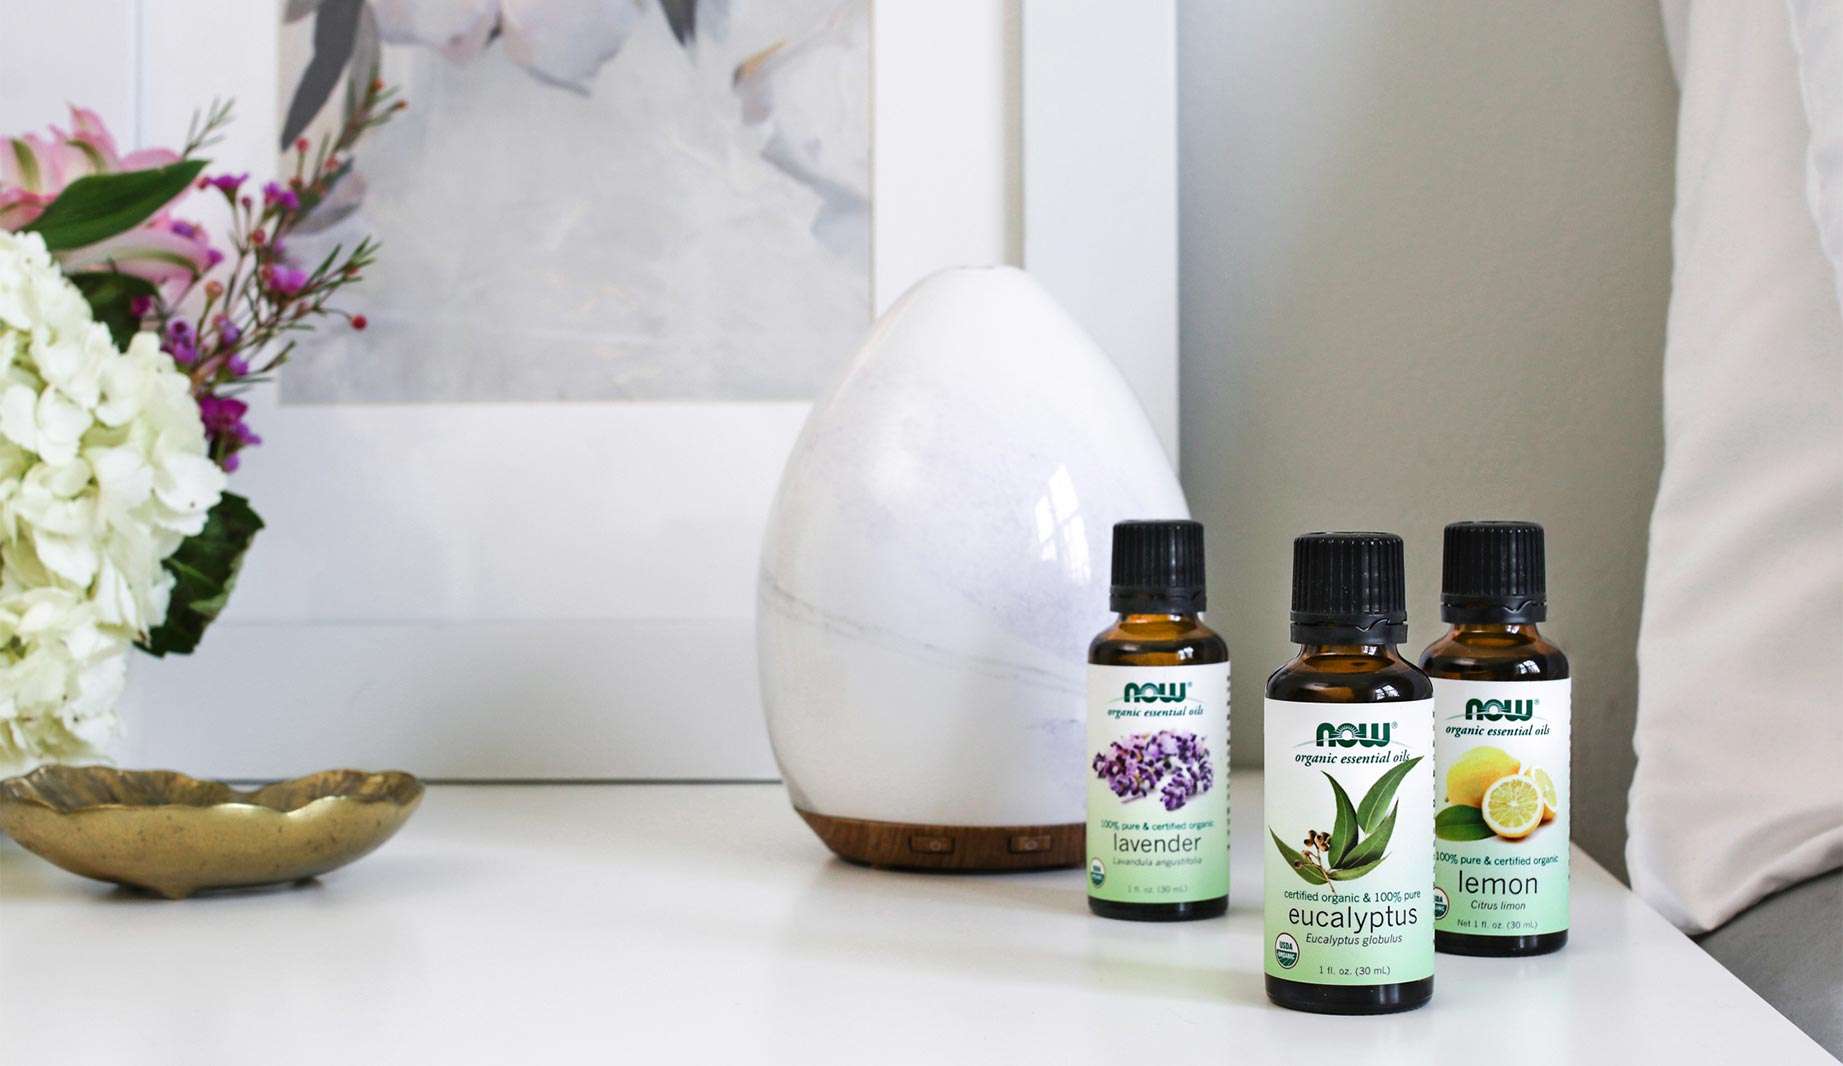 NOW Solutions Lavender, Eucalyptus, and Lemon Essential Oils on a counter with the Glass diffuser